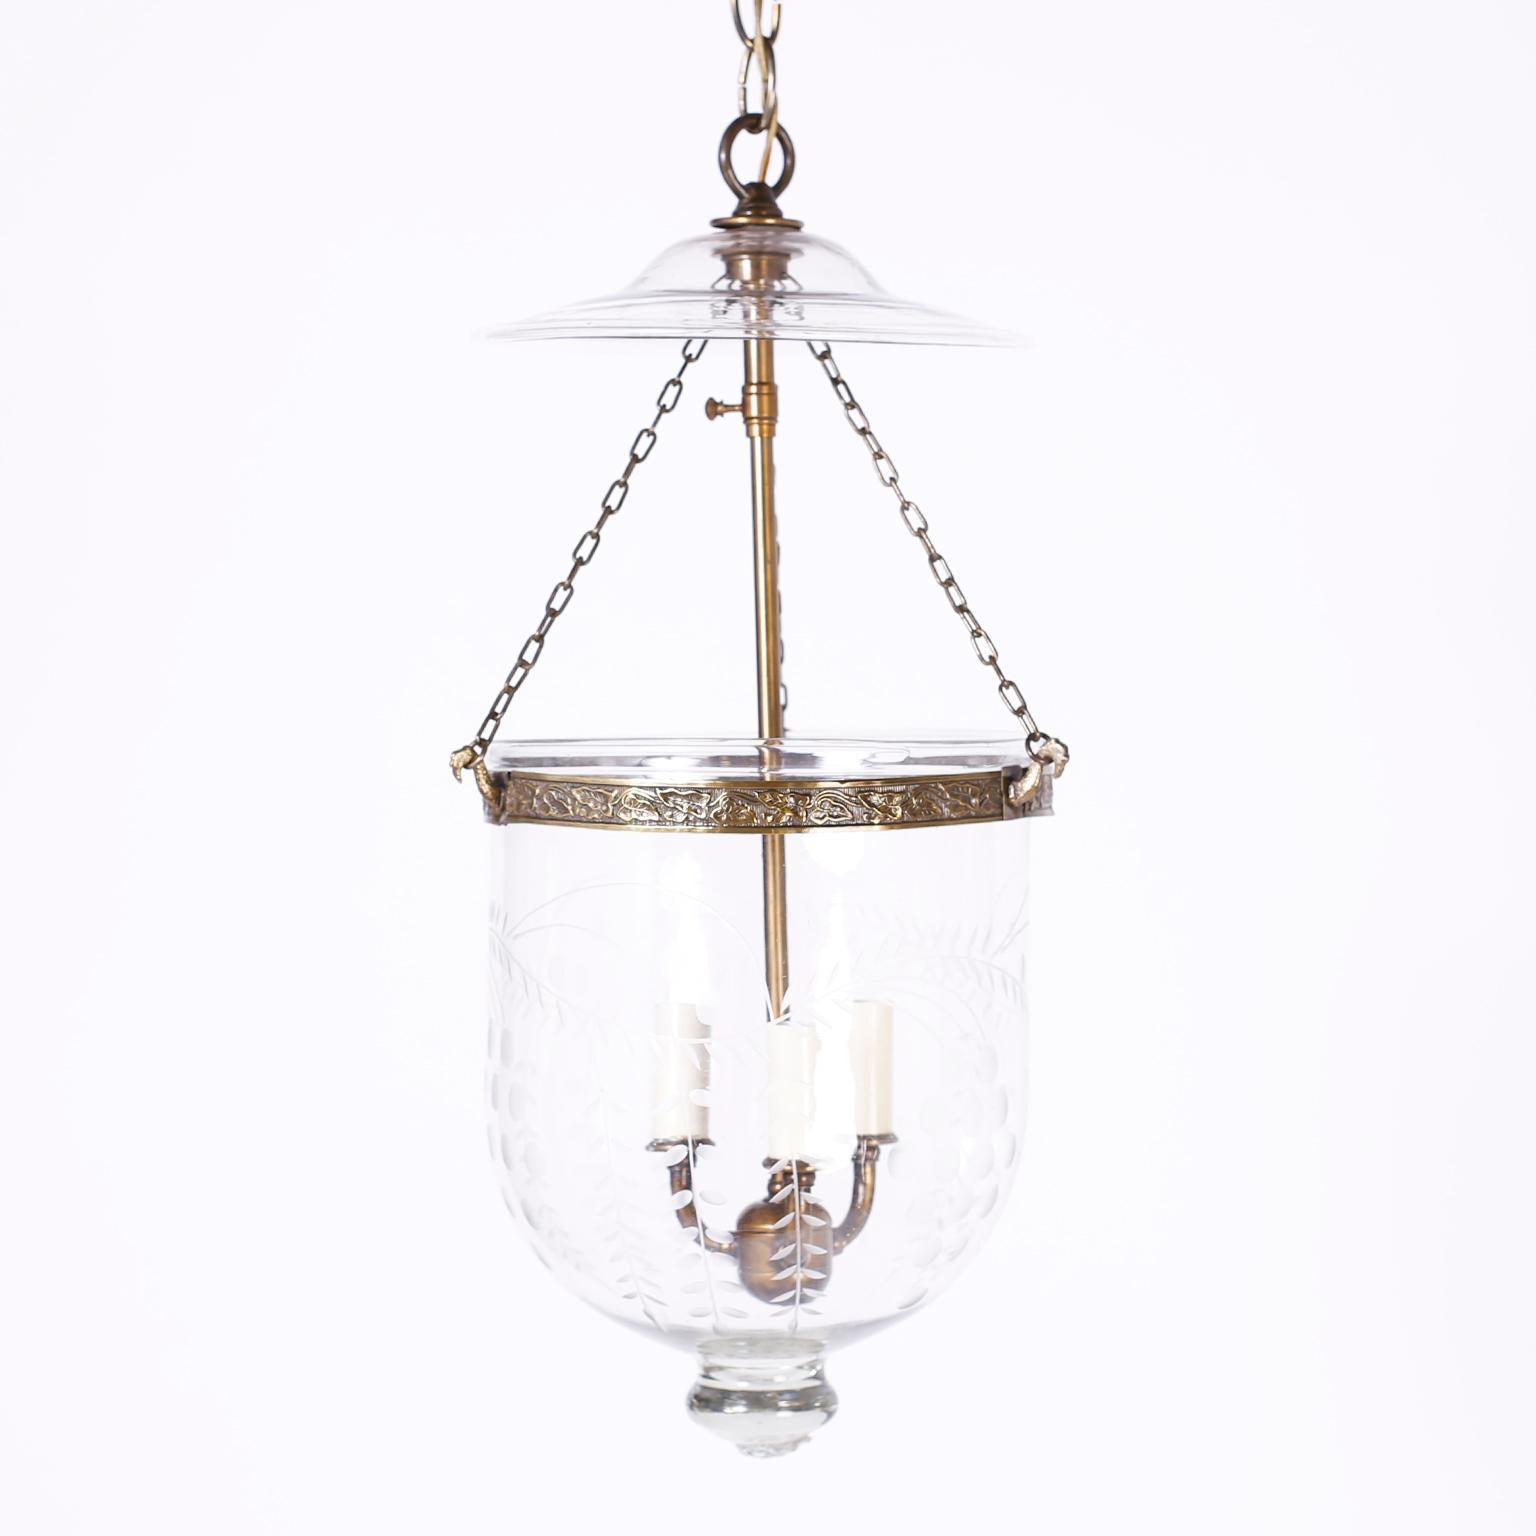 Antique pair of English bell jar pendant light fixtures or lanterns with classic form, smoke bell, brass hardware with adjustable stem and a hand blown glass bell with etched leaves and berries. Priced individually.